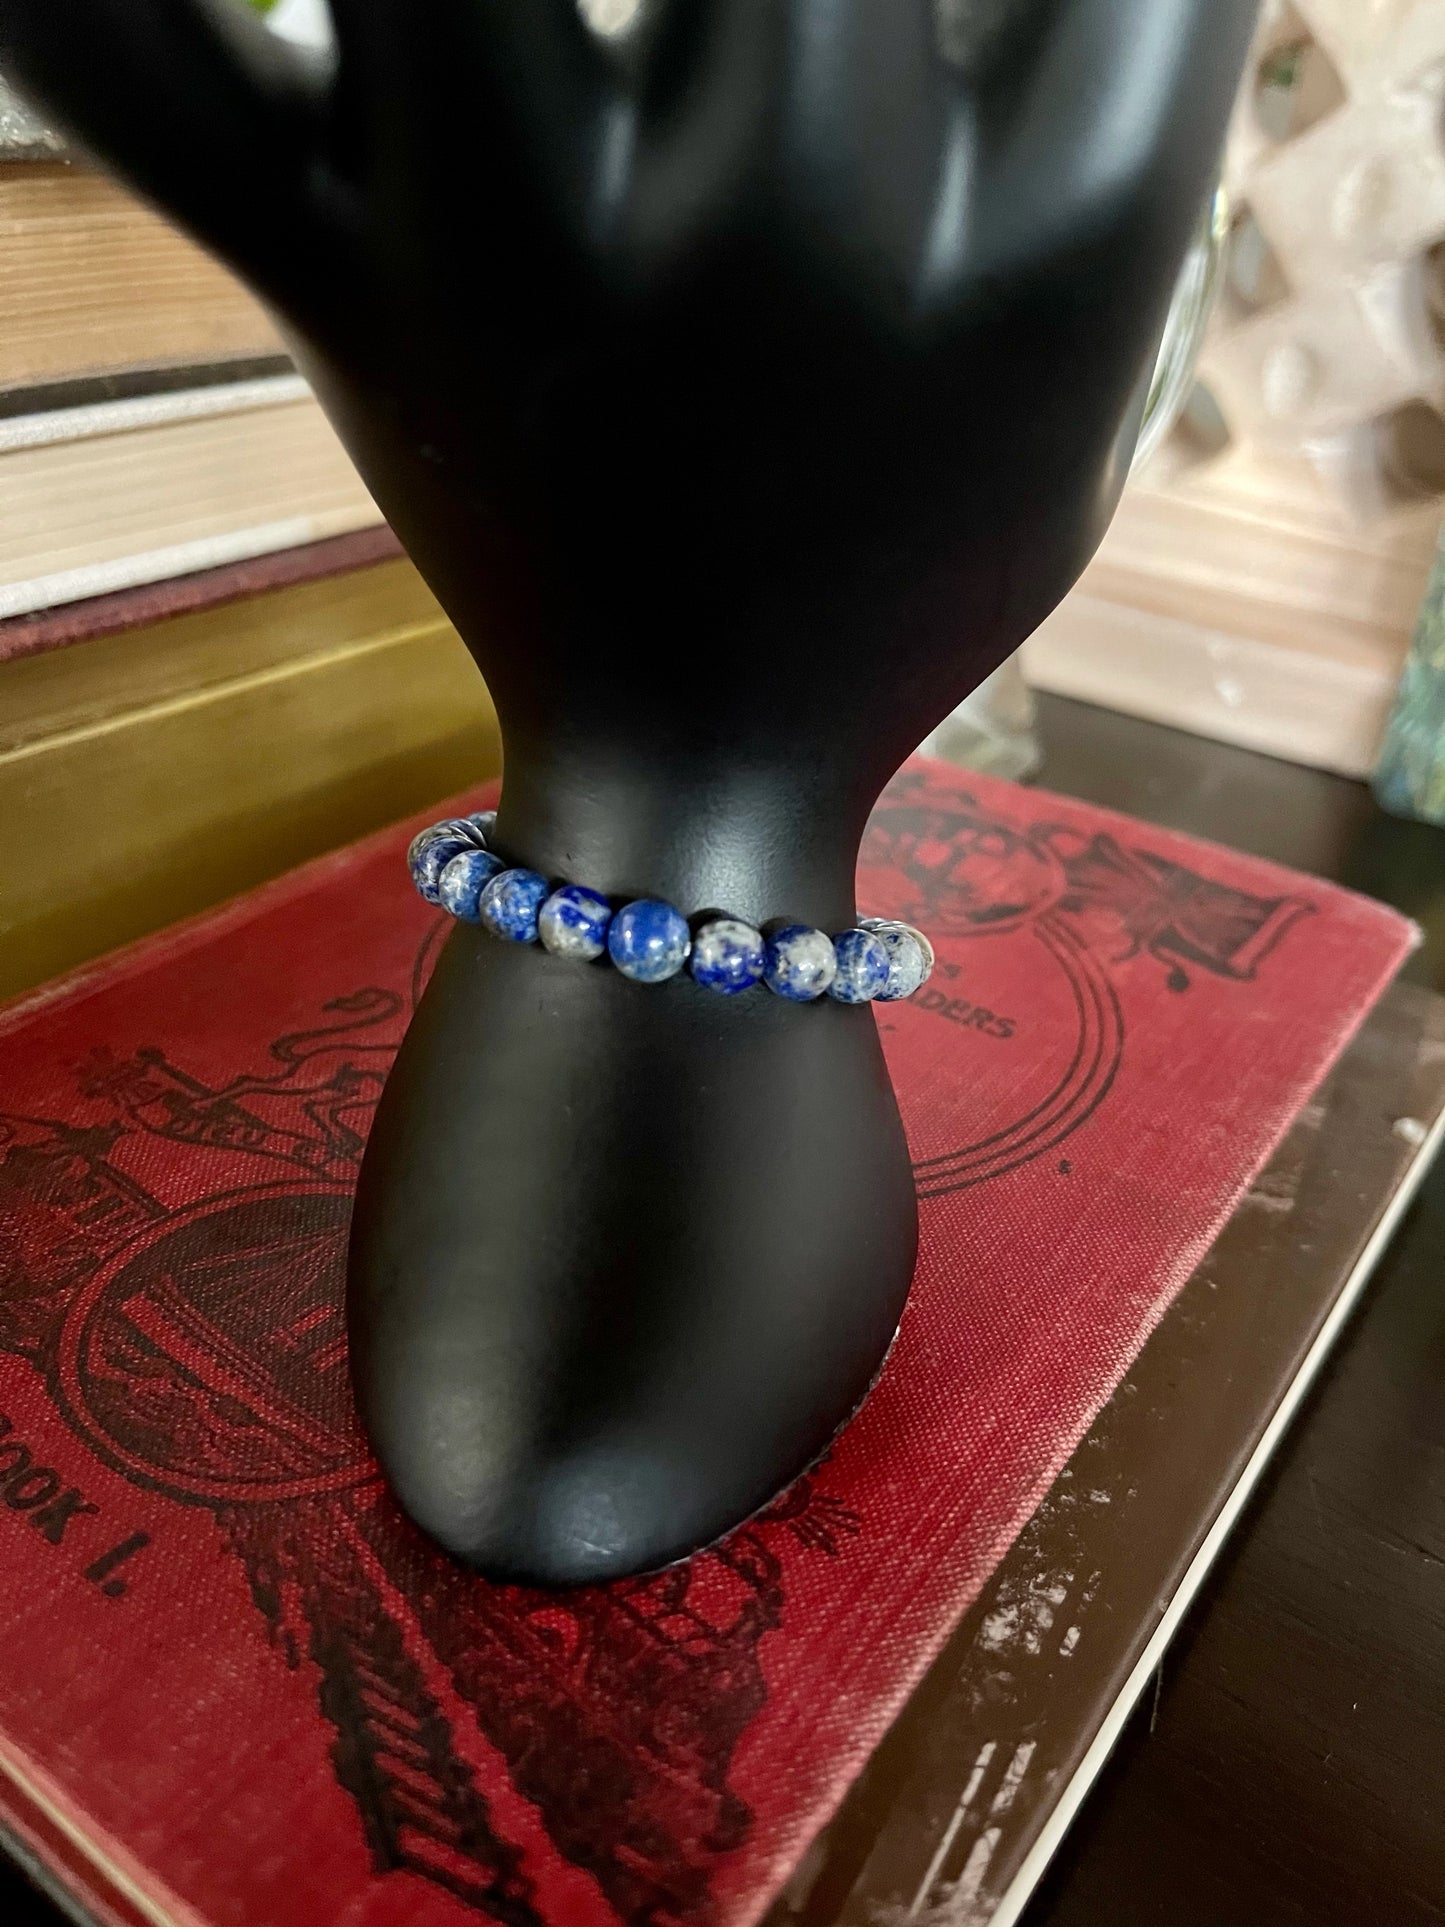 Little Goddess Hand Beaded Sodalite Bracelet with Gift Pouch, Bodhi Jewelry